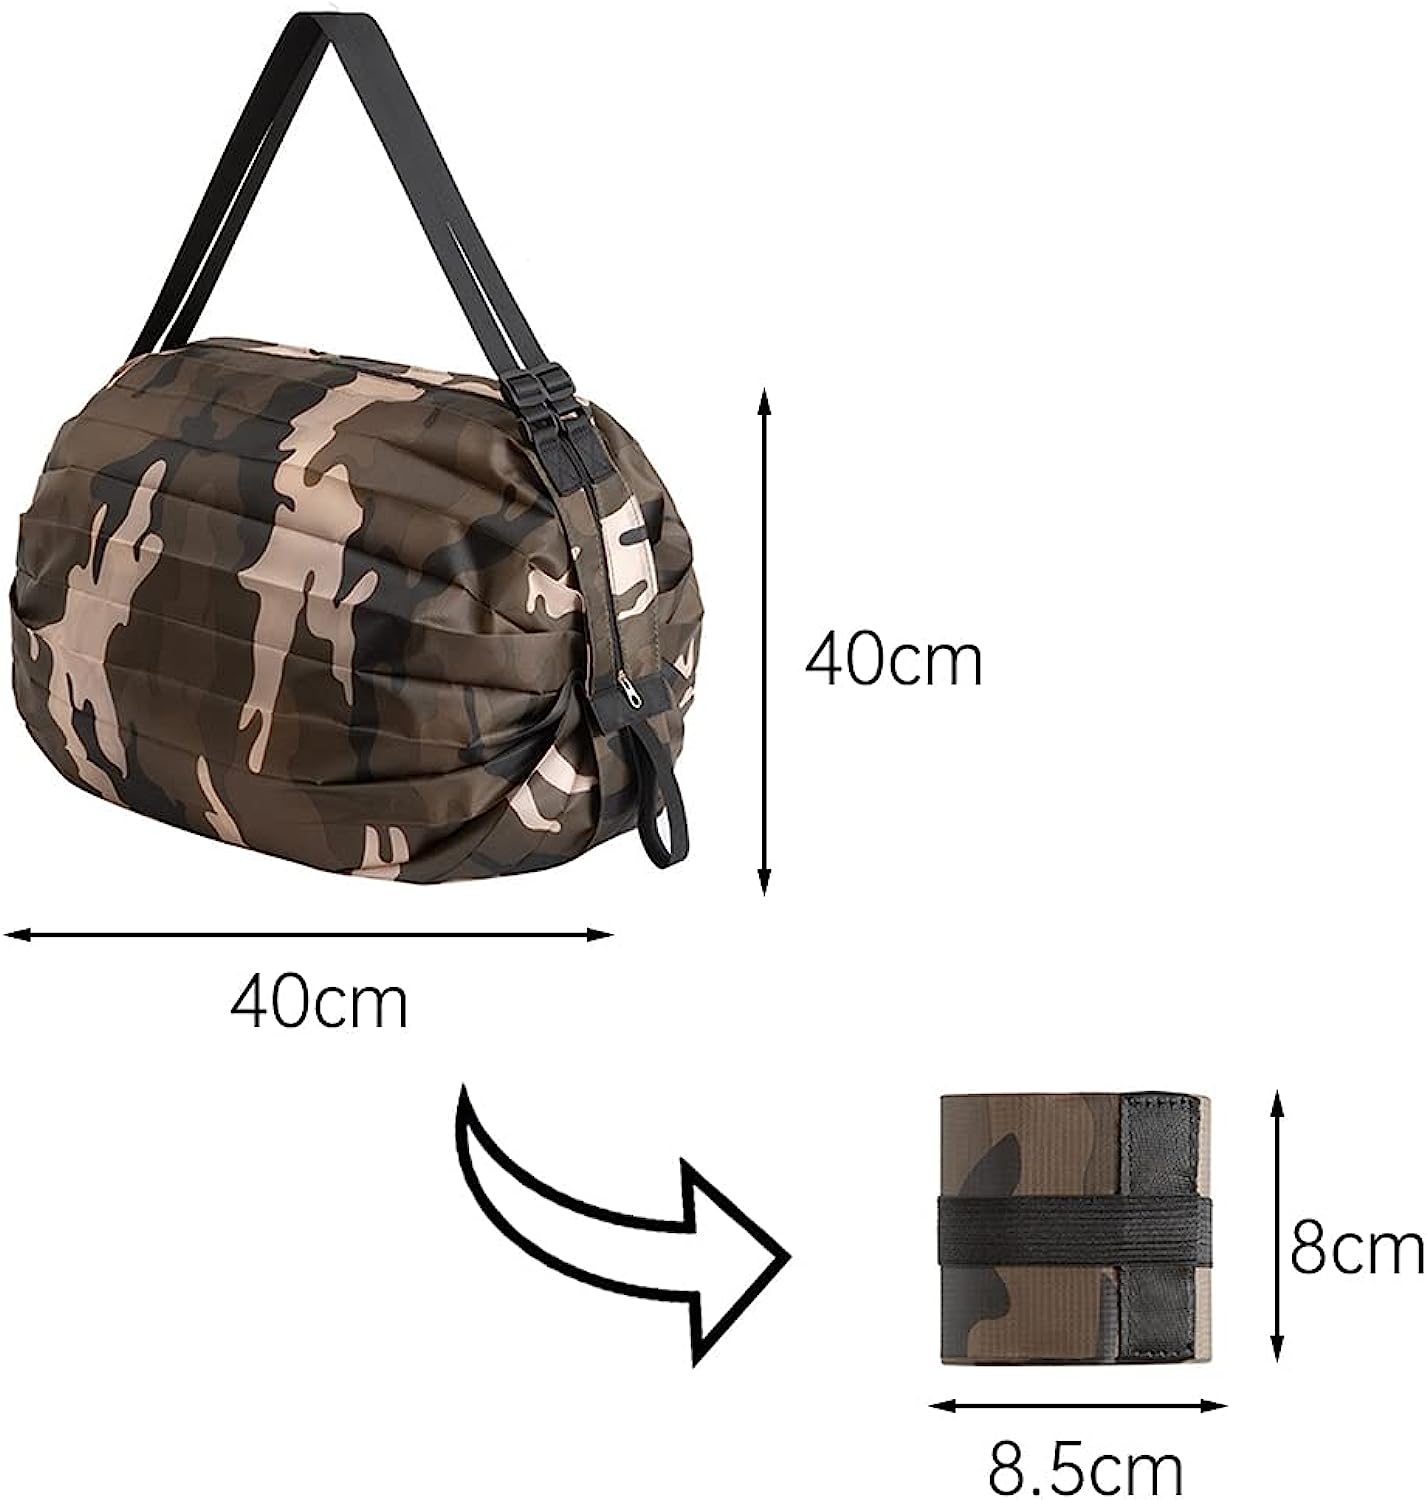 Reusable Foldable Shopping Bag with its size